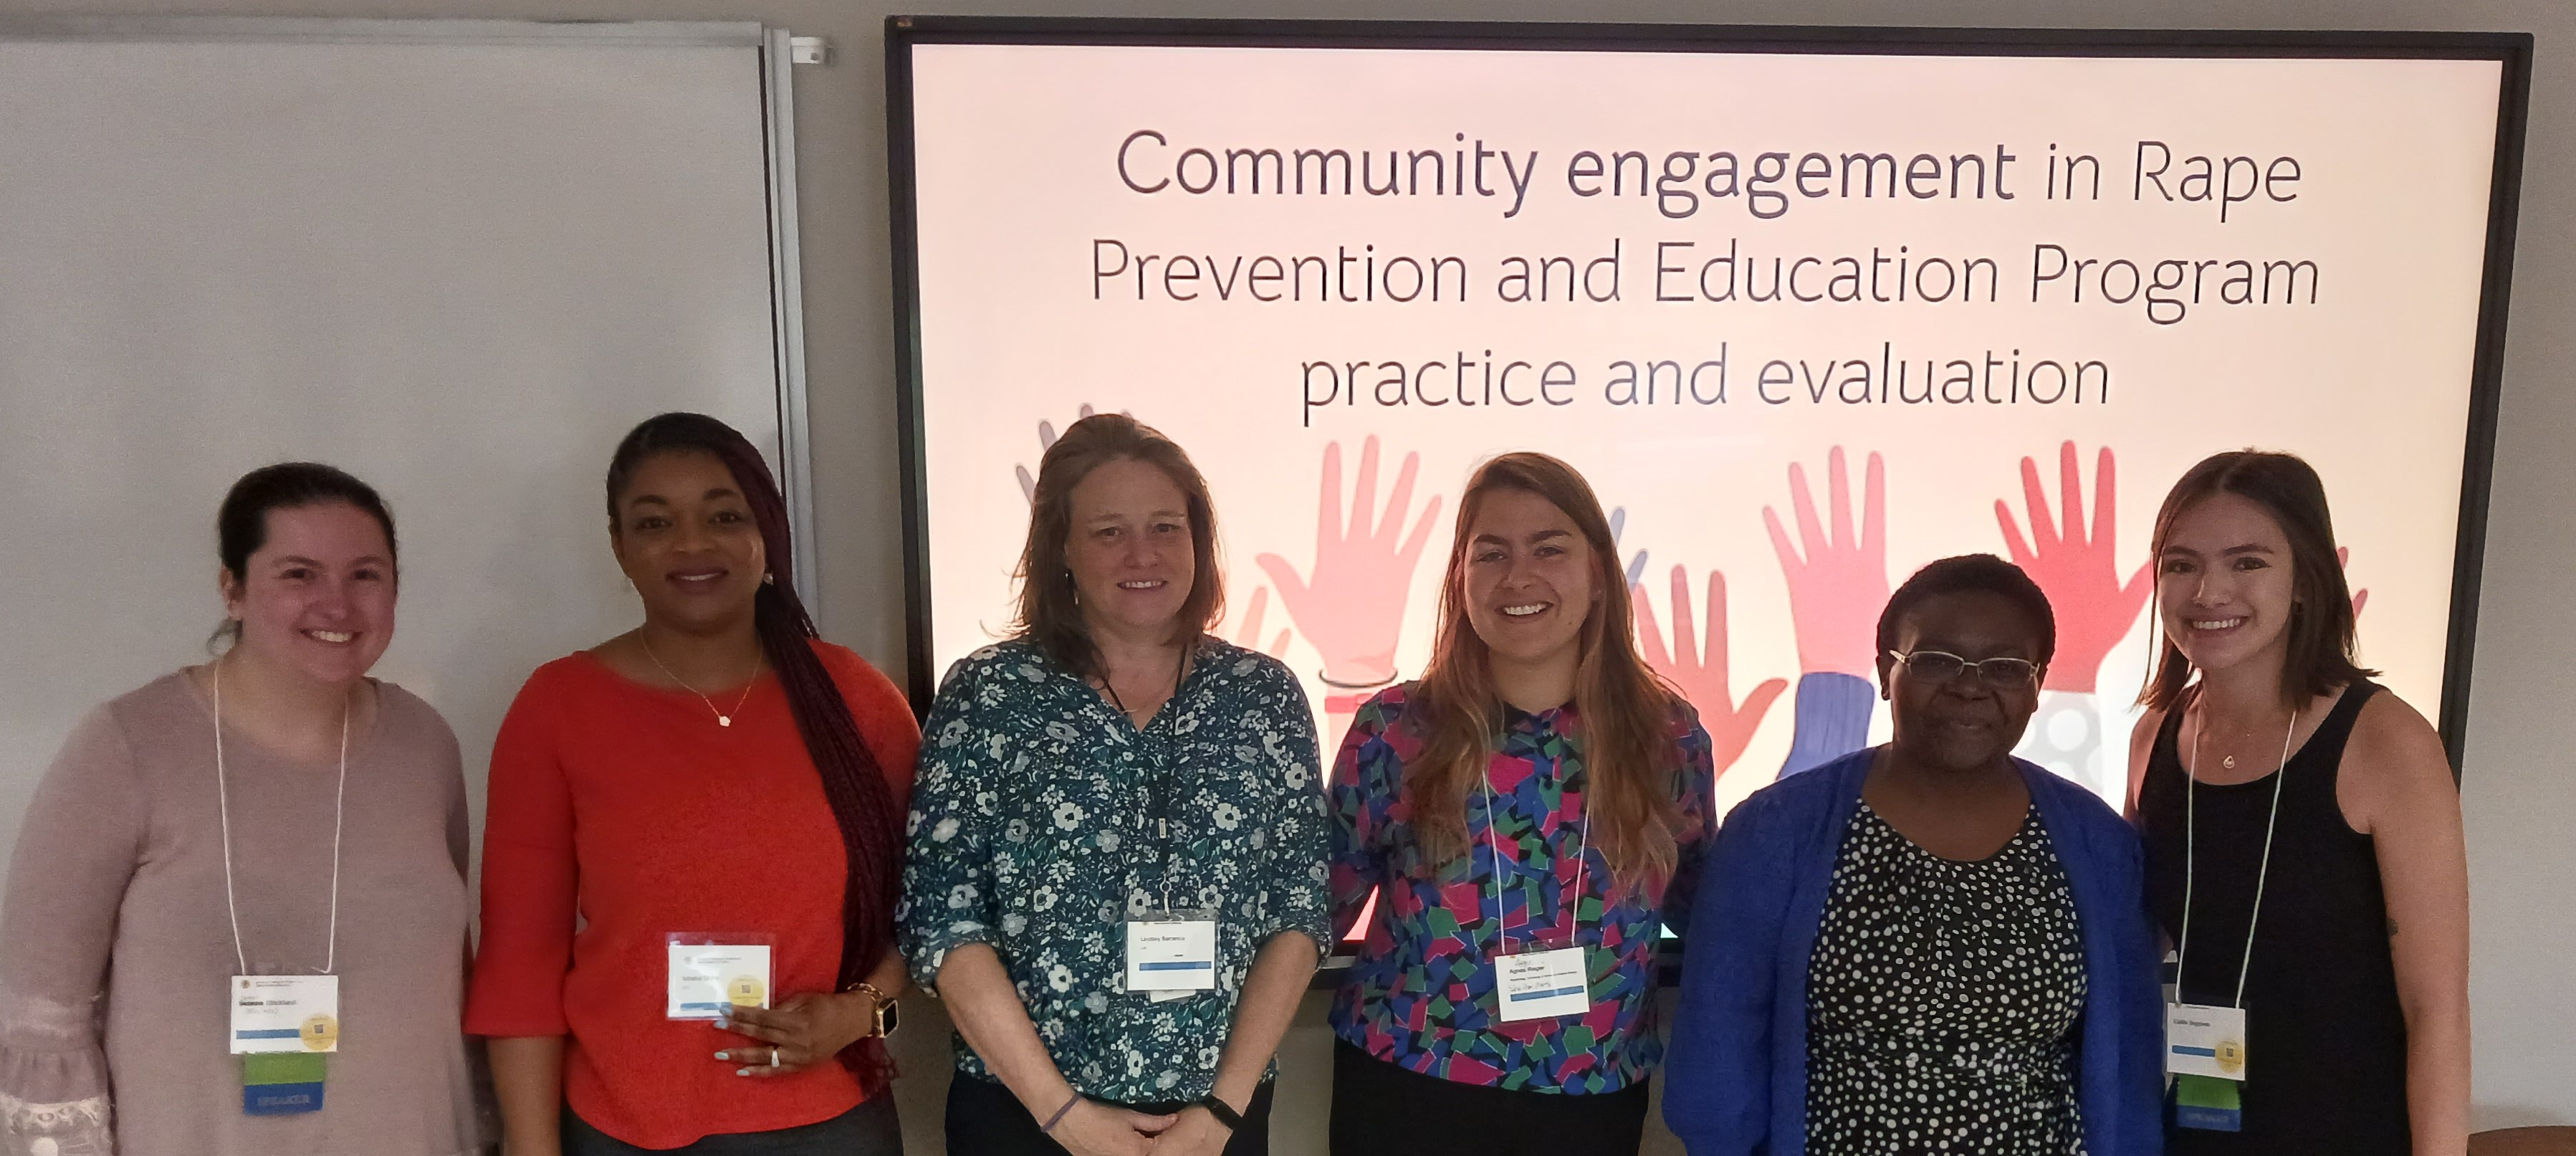 This is a photo of the in-person presenters at the Community engagement in Rape Prevention and Education panel, at the Society for Community Research and Action. The photo is of a group of people, standing side by side and smiling. They are wearing business-casual clothes and conference name badges. Behind them is a presentation slide that reads: "Community engagement in Rape Prevention and Education."  